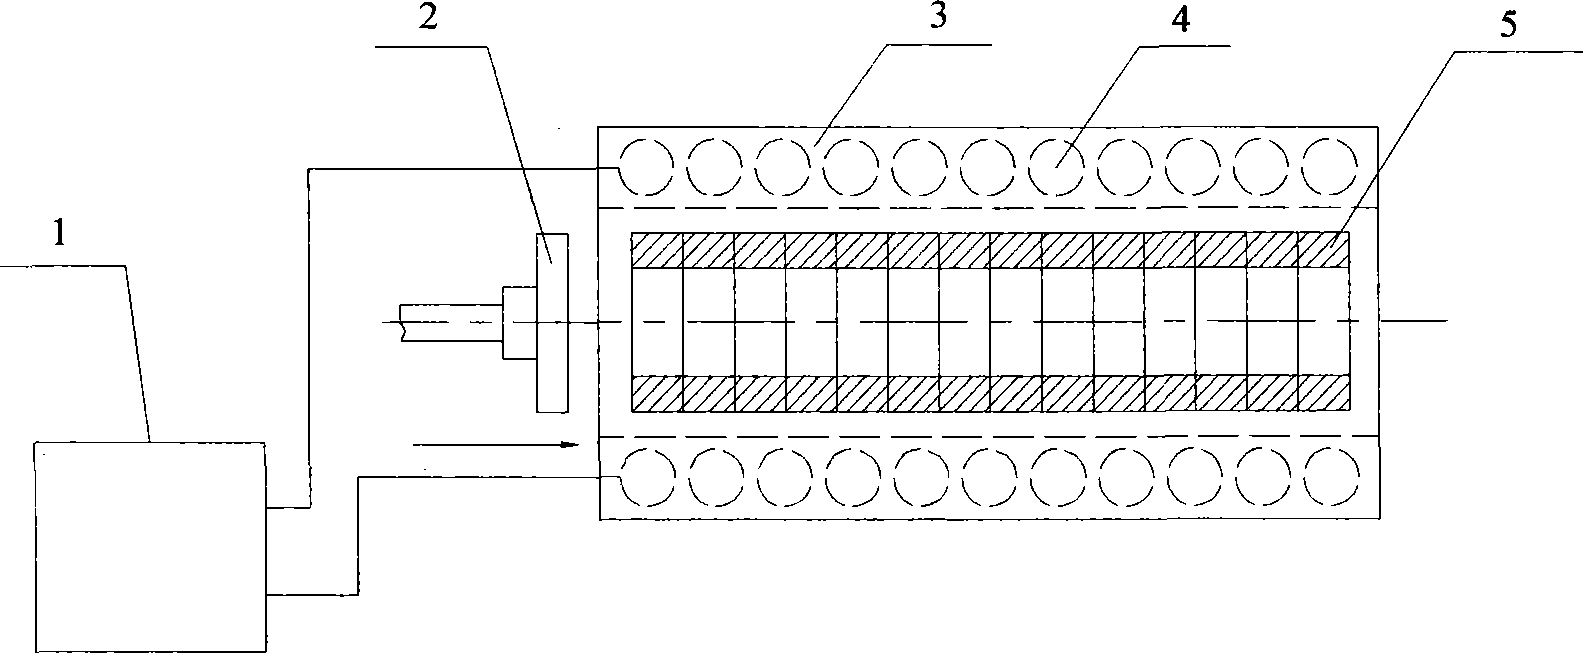 Method for precisely forming copper-nickel alloy flange pipes